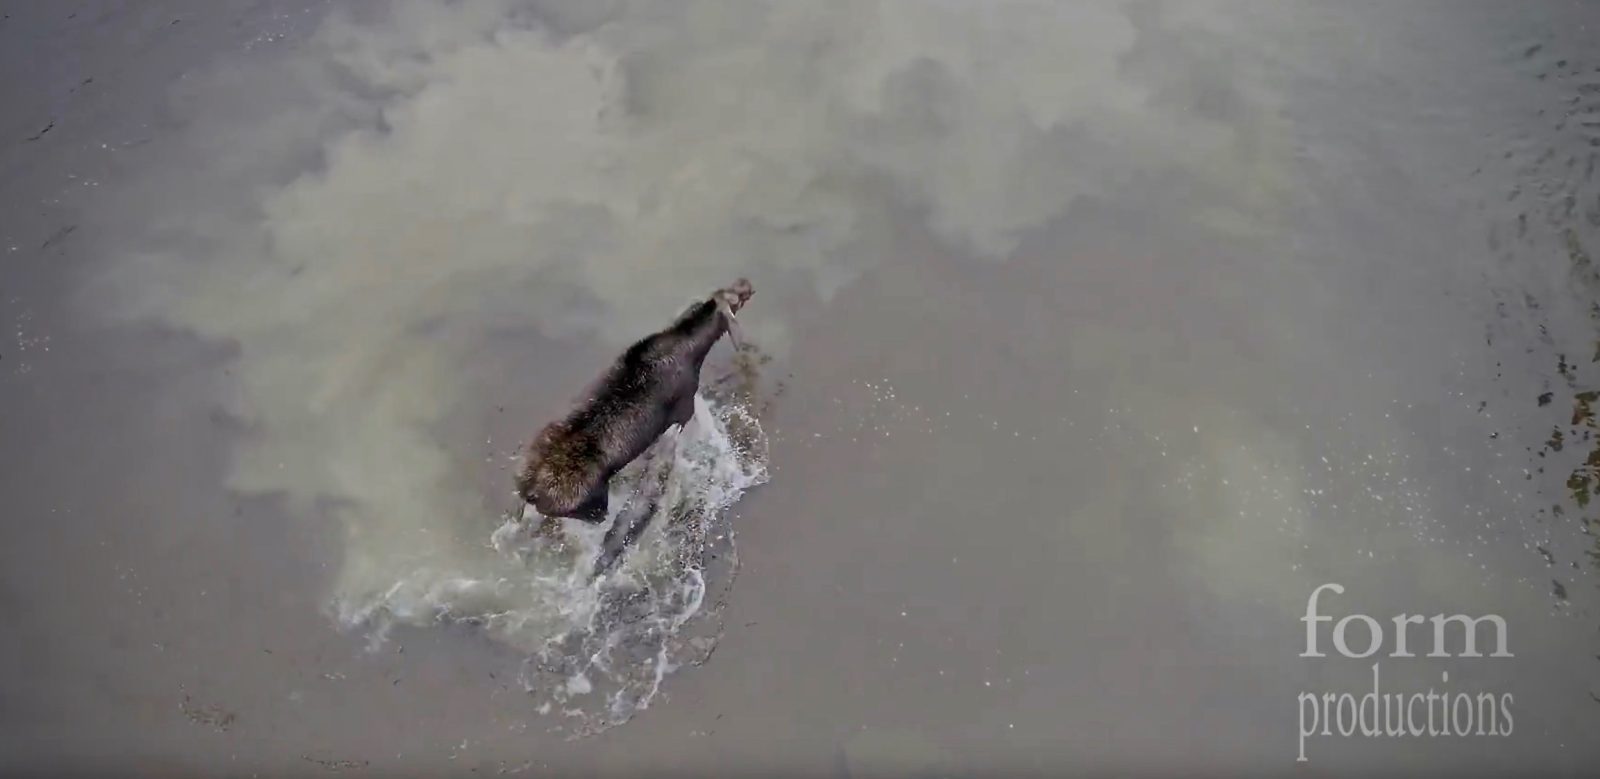 DJI Phantom 4 Pro drone captures moose fighting off a wolf in northern Ontario [video] (0)